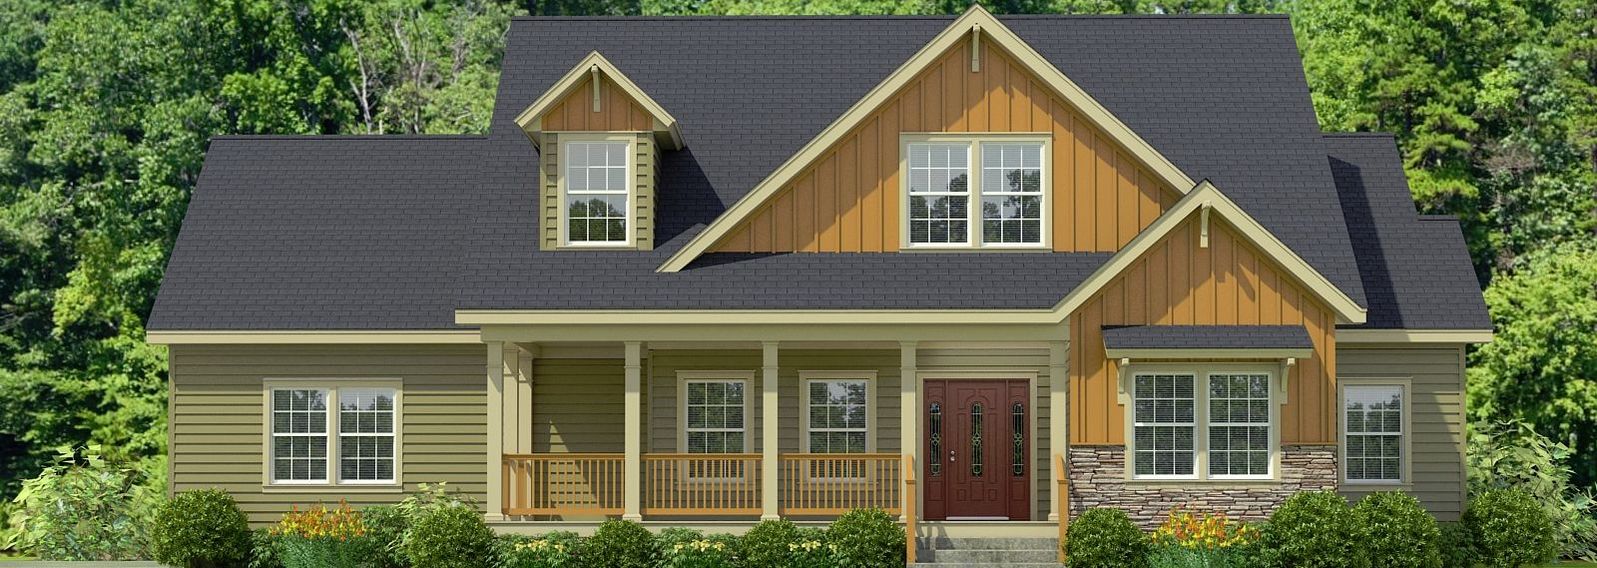 This Cape Cod Style Modular Home Comes with New Exciting Features - Greensboro, NC